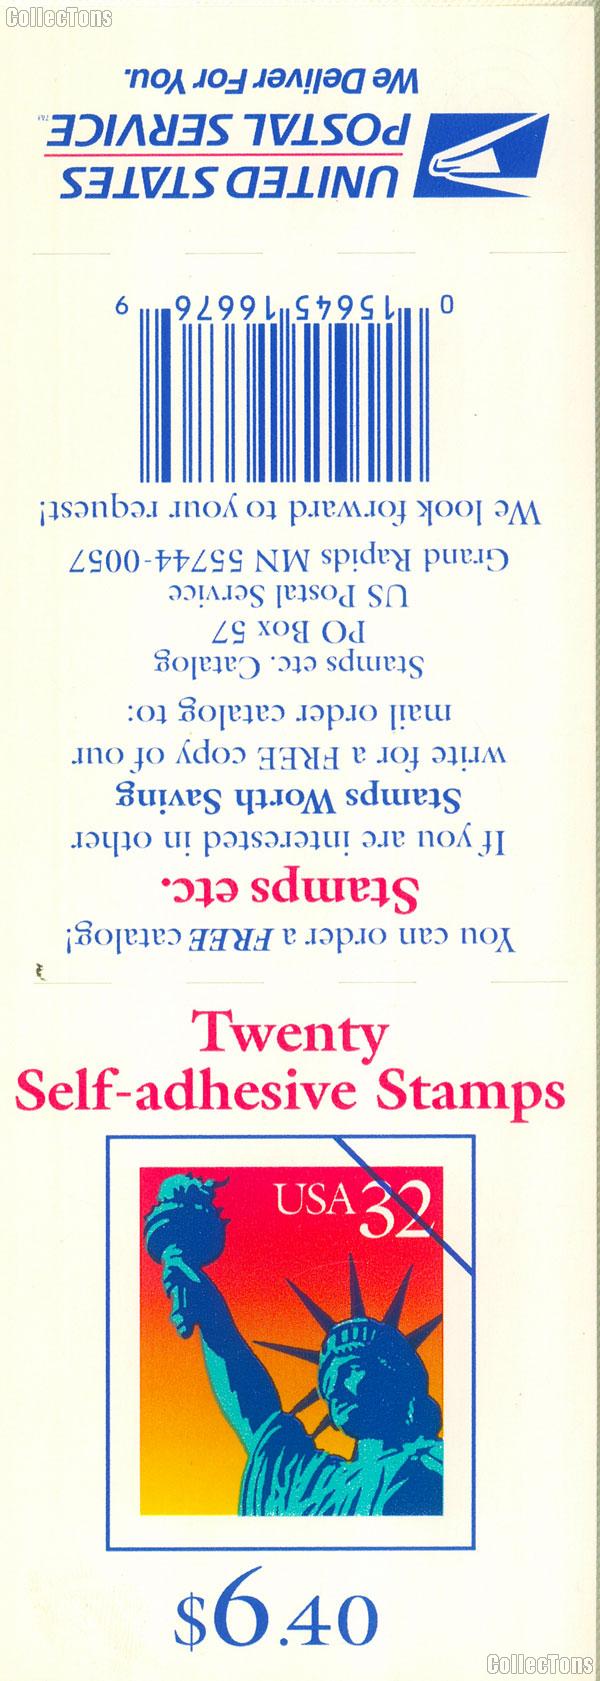 1997 Statue of Liberty 32 Cent US Postage Stamp Unused Booklet of 20 Scott #3122a